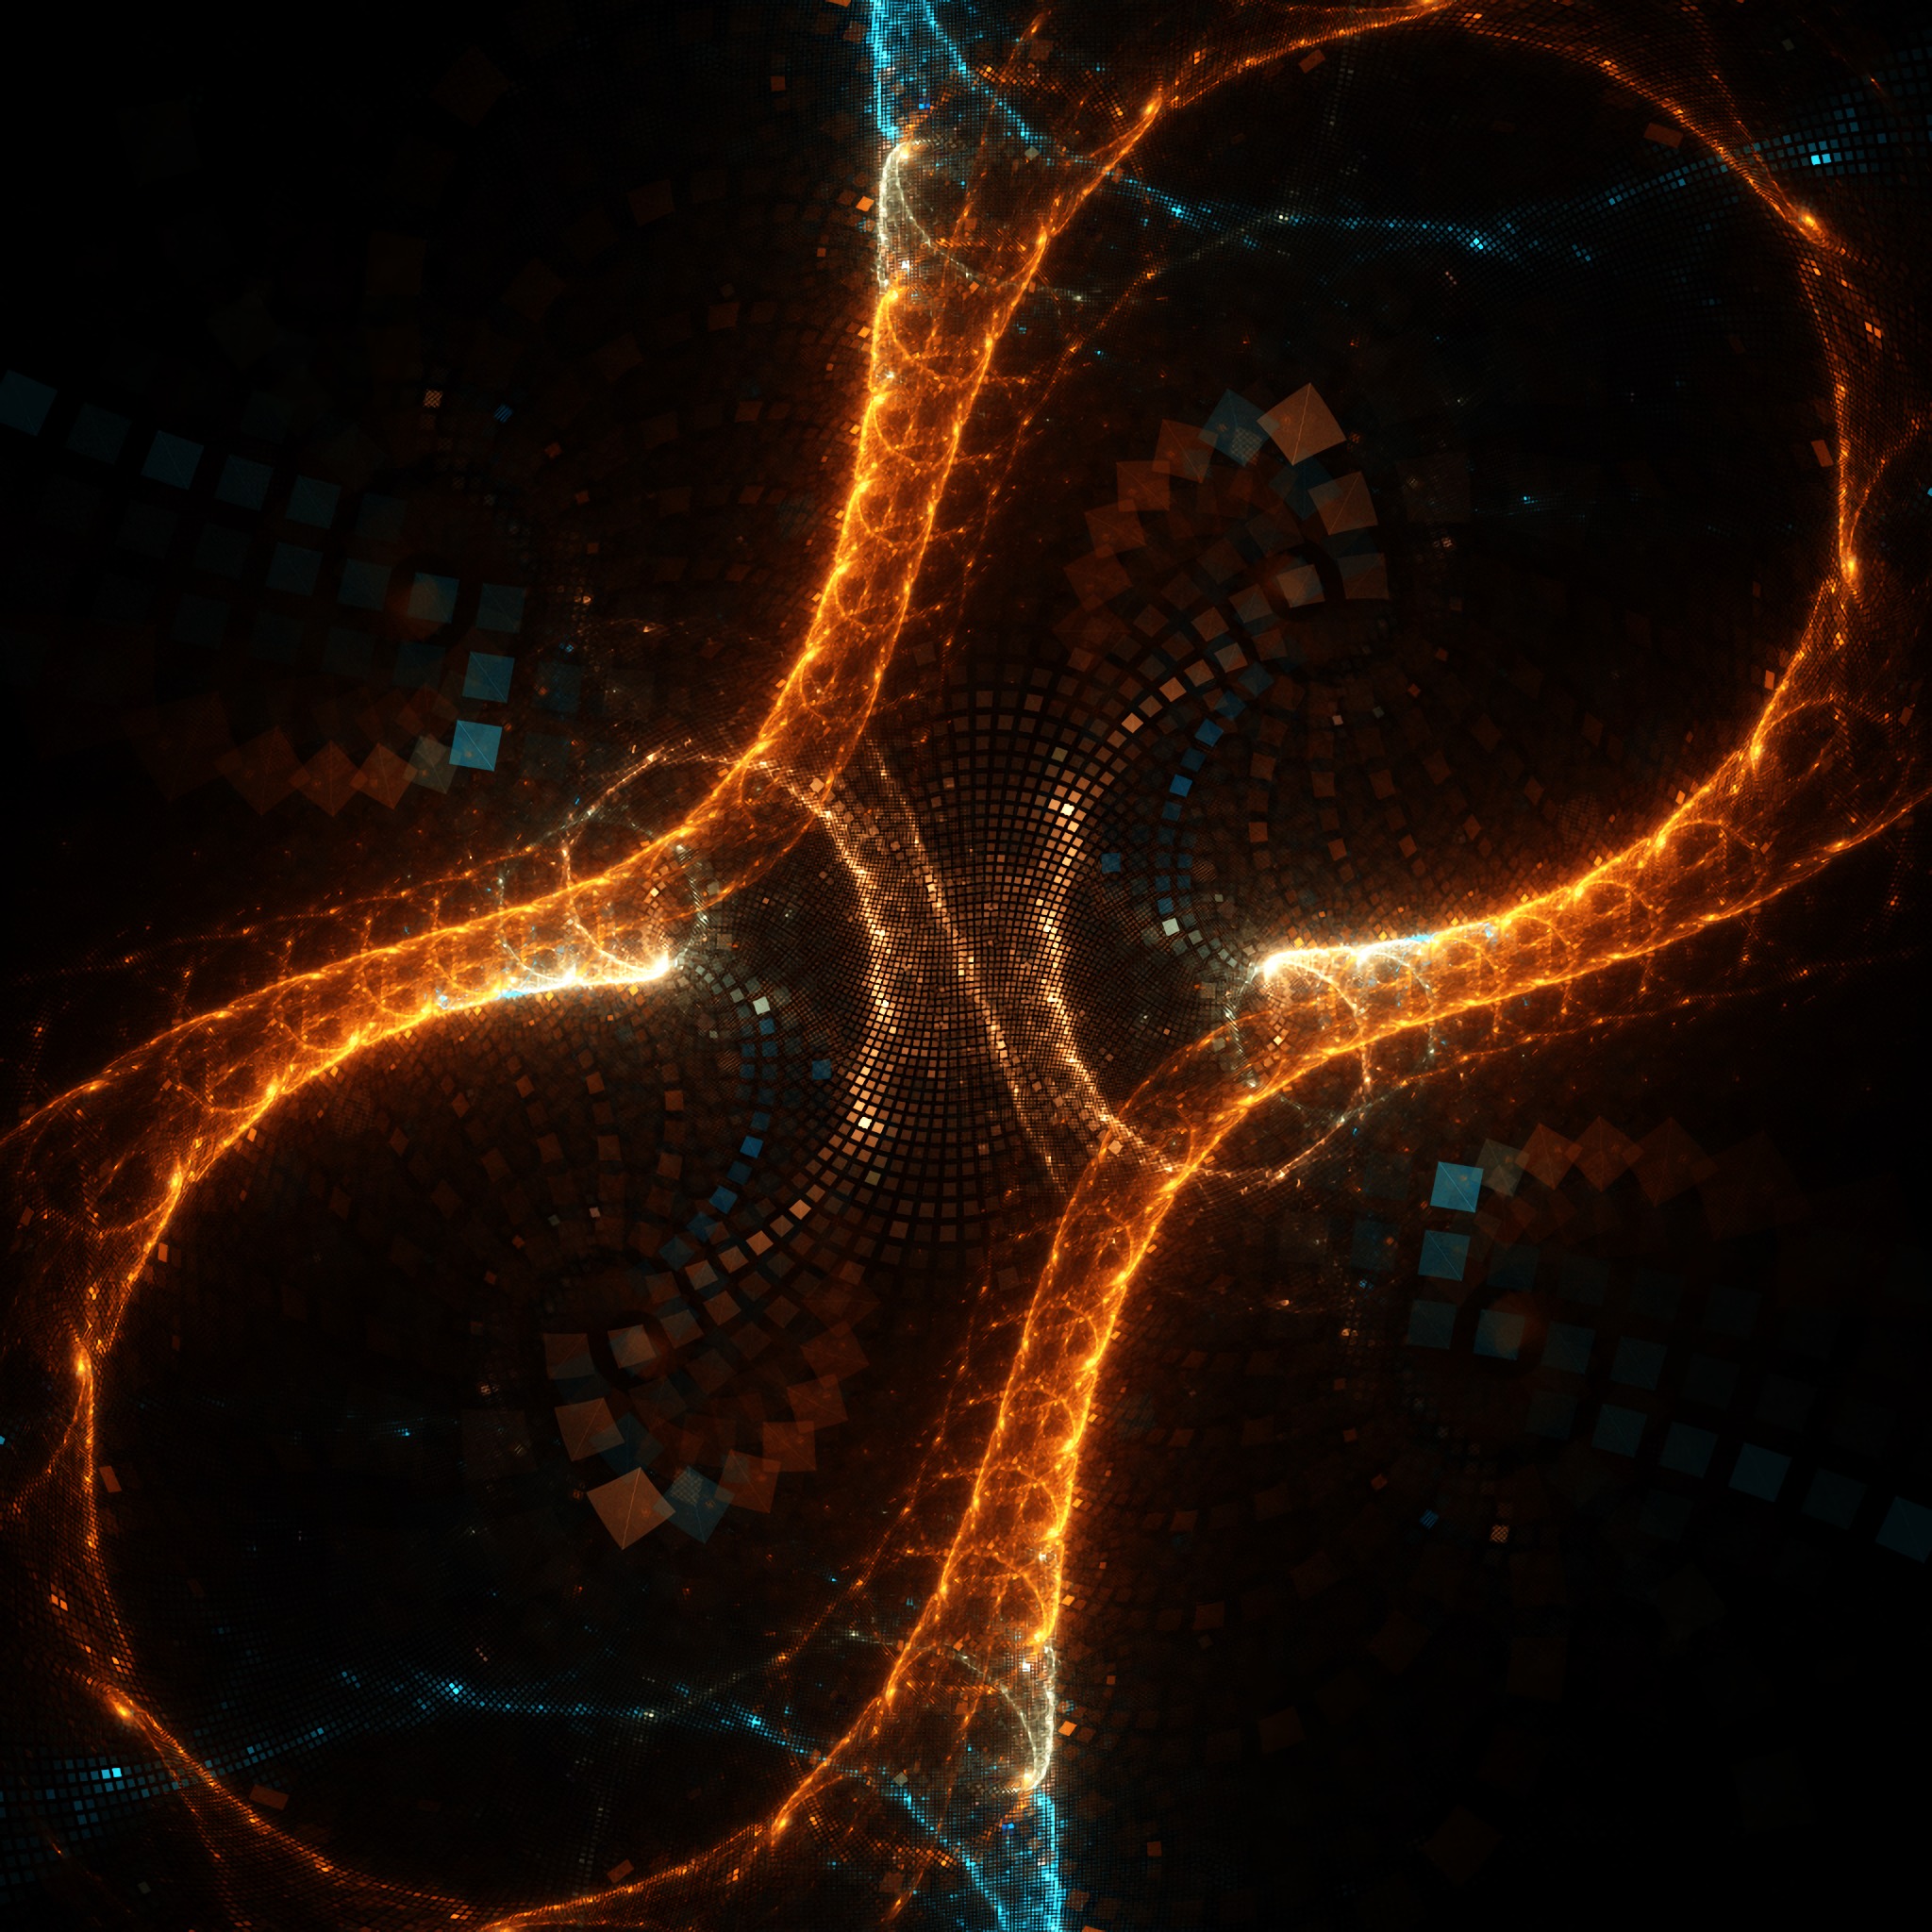 Wallpaper for mobile devices glow, intricate, abstract, fractal